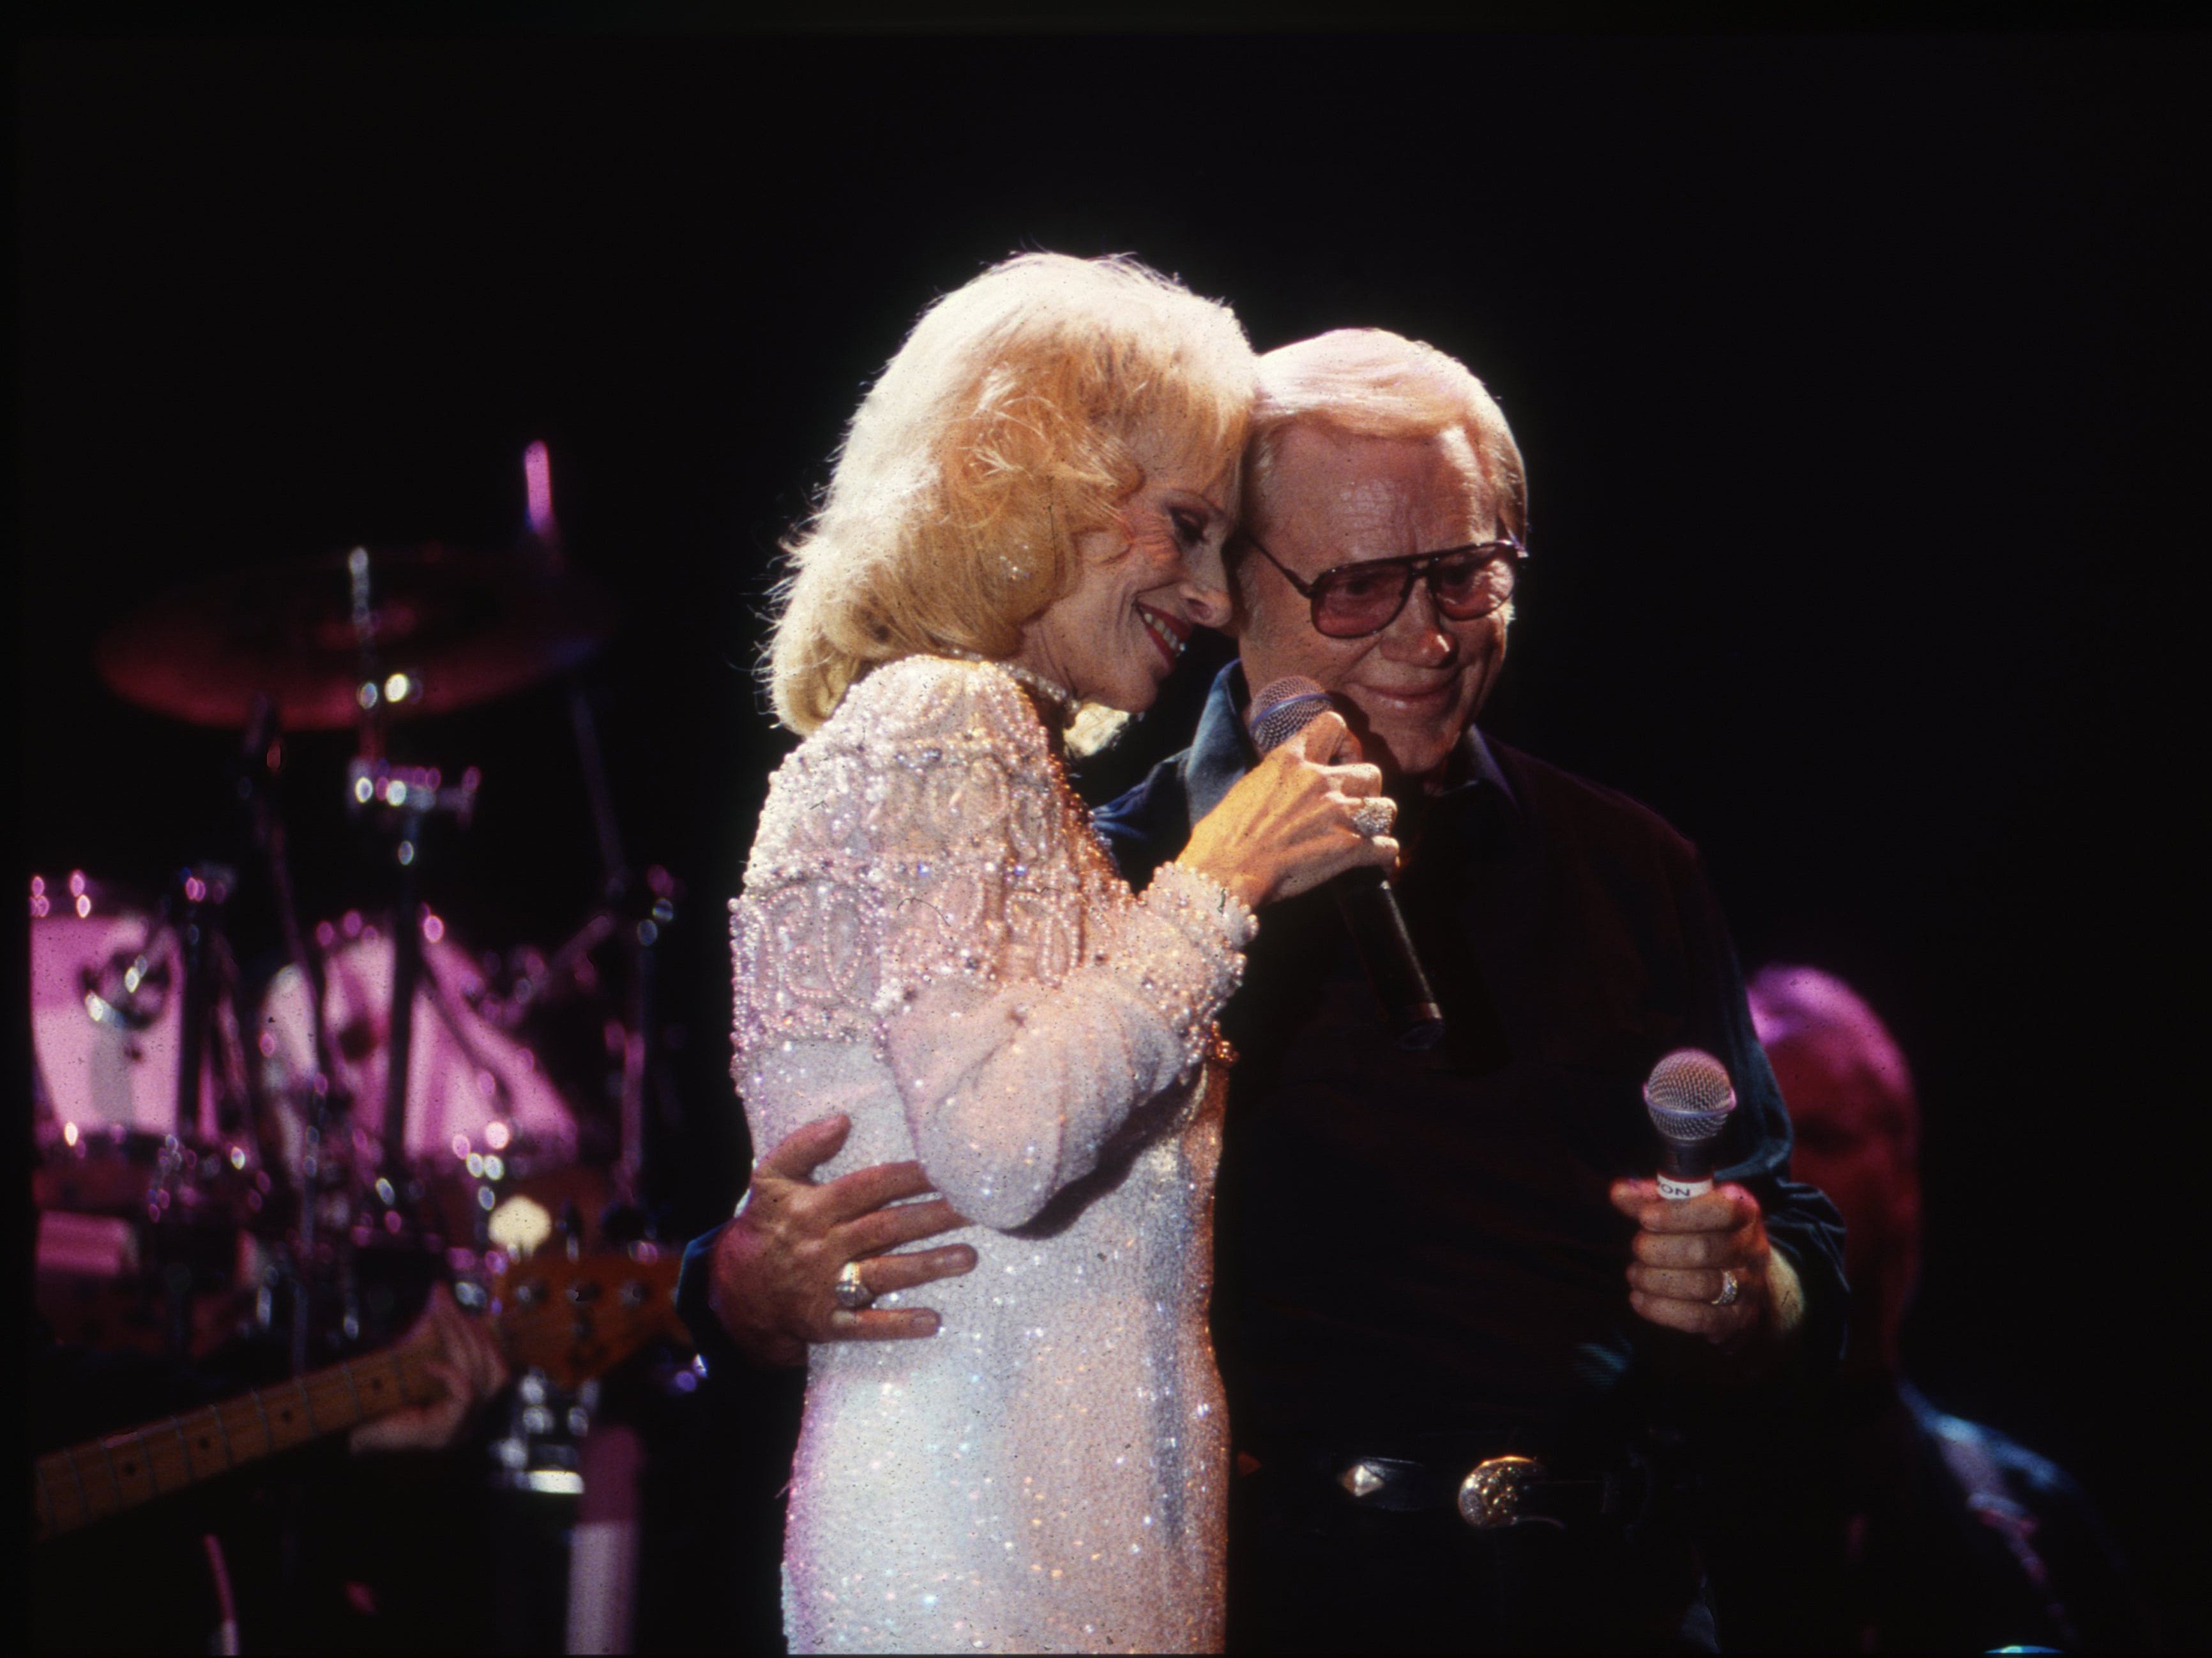 Tammy Wynette and George Jones performs at Fanfair on January 1, 1995 in Nashville, Tennessee | Source: Getty Images